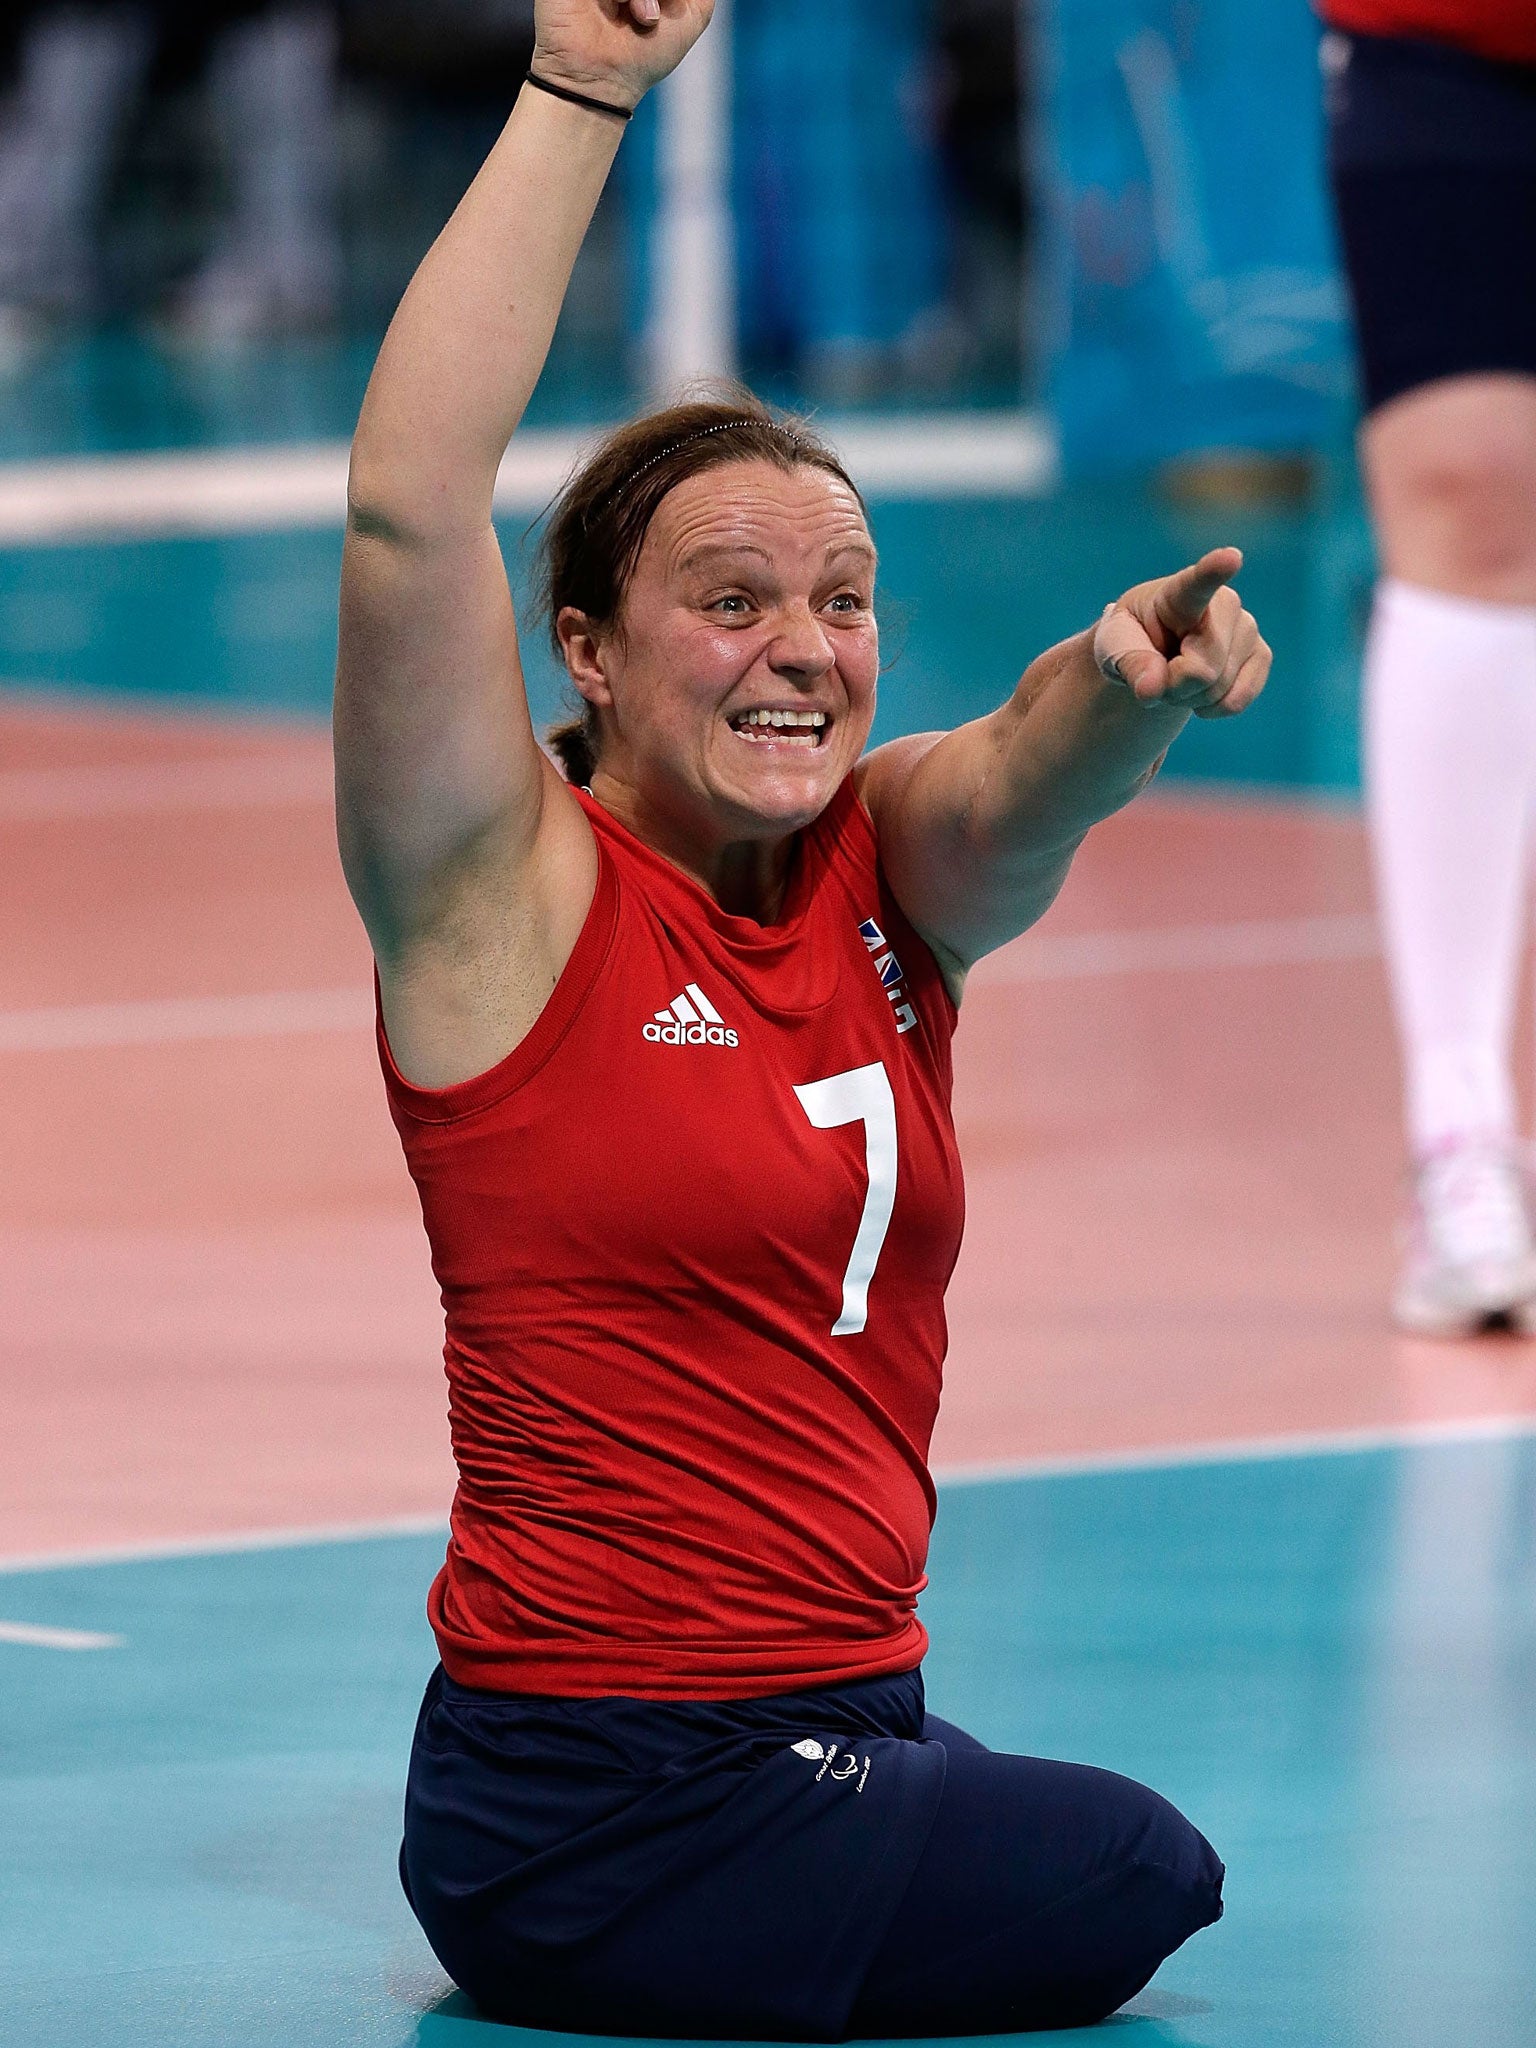 Sitting out: Bomb victim Martine Wright says volleyball gave her life